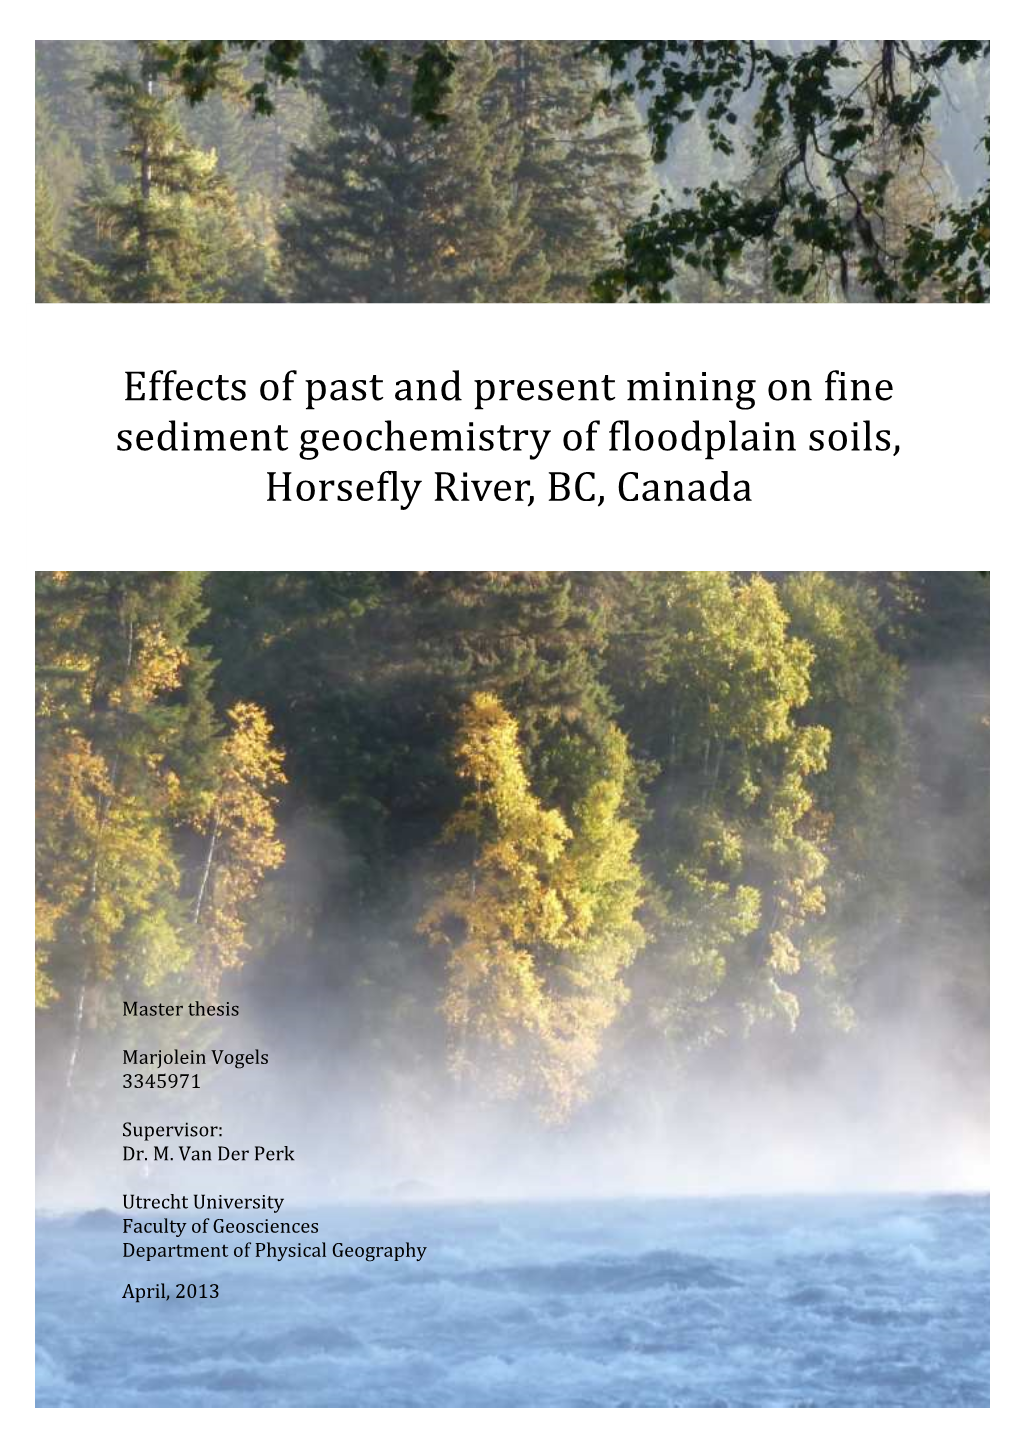 Effects of Past and Present Mining on Fine Sediment Geochemistry of Floodplain Soils, Horsefly River, BC, Canada